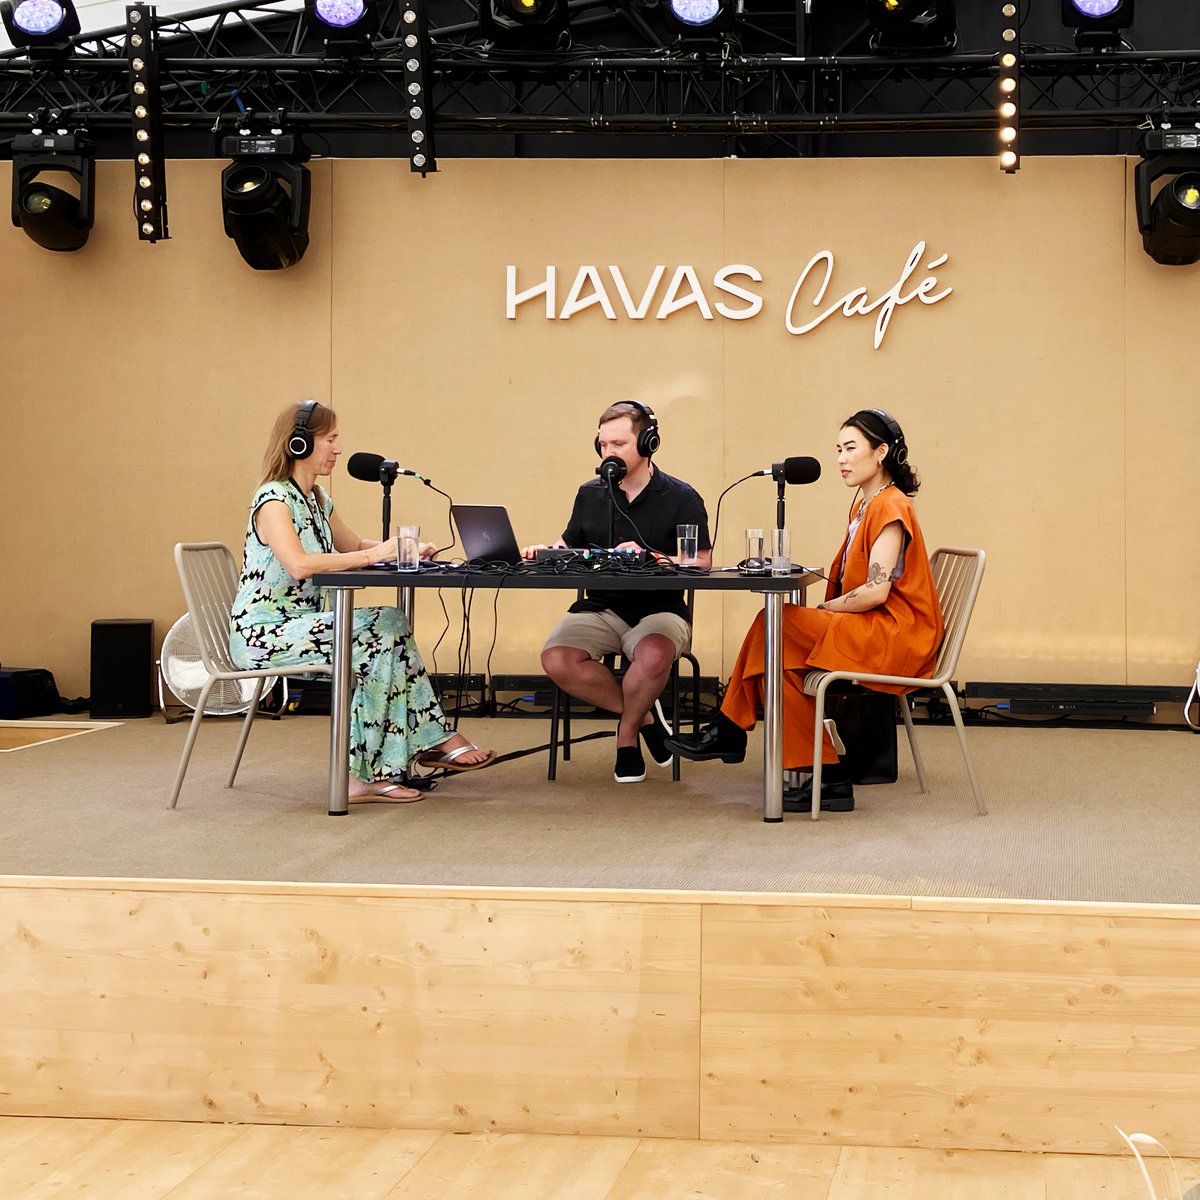 Thank you Ben Downing, @smilberg22 and tiktoker Hina for this special edition of the #MeaningfulMediaPodcast in Cannes!

#HavasCannes #HavasCafe #CannesLions2023 #OneHavas Havas Media Network TikTok